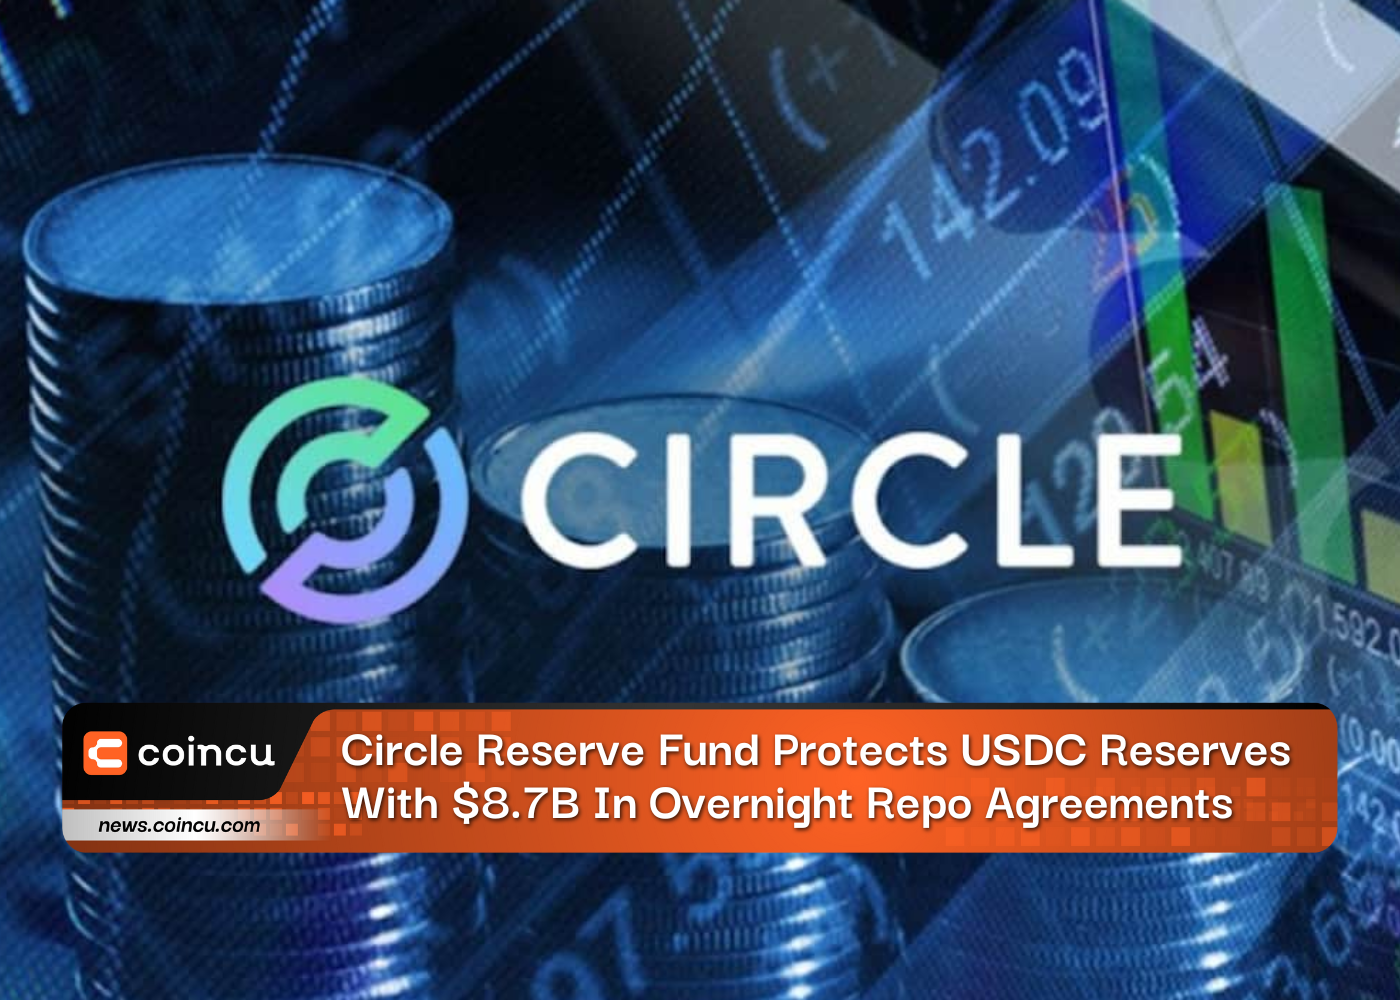 Circle Reserve Fund Protects USDC Reserves With $8.7B In Overnight Repo Agreements